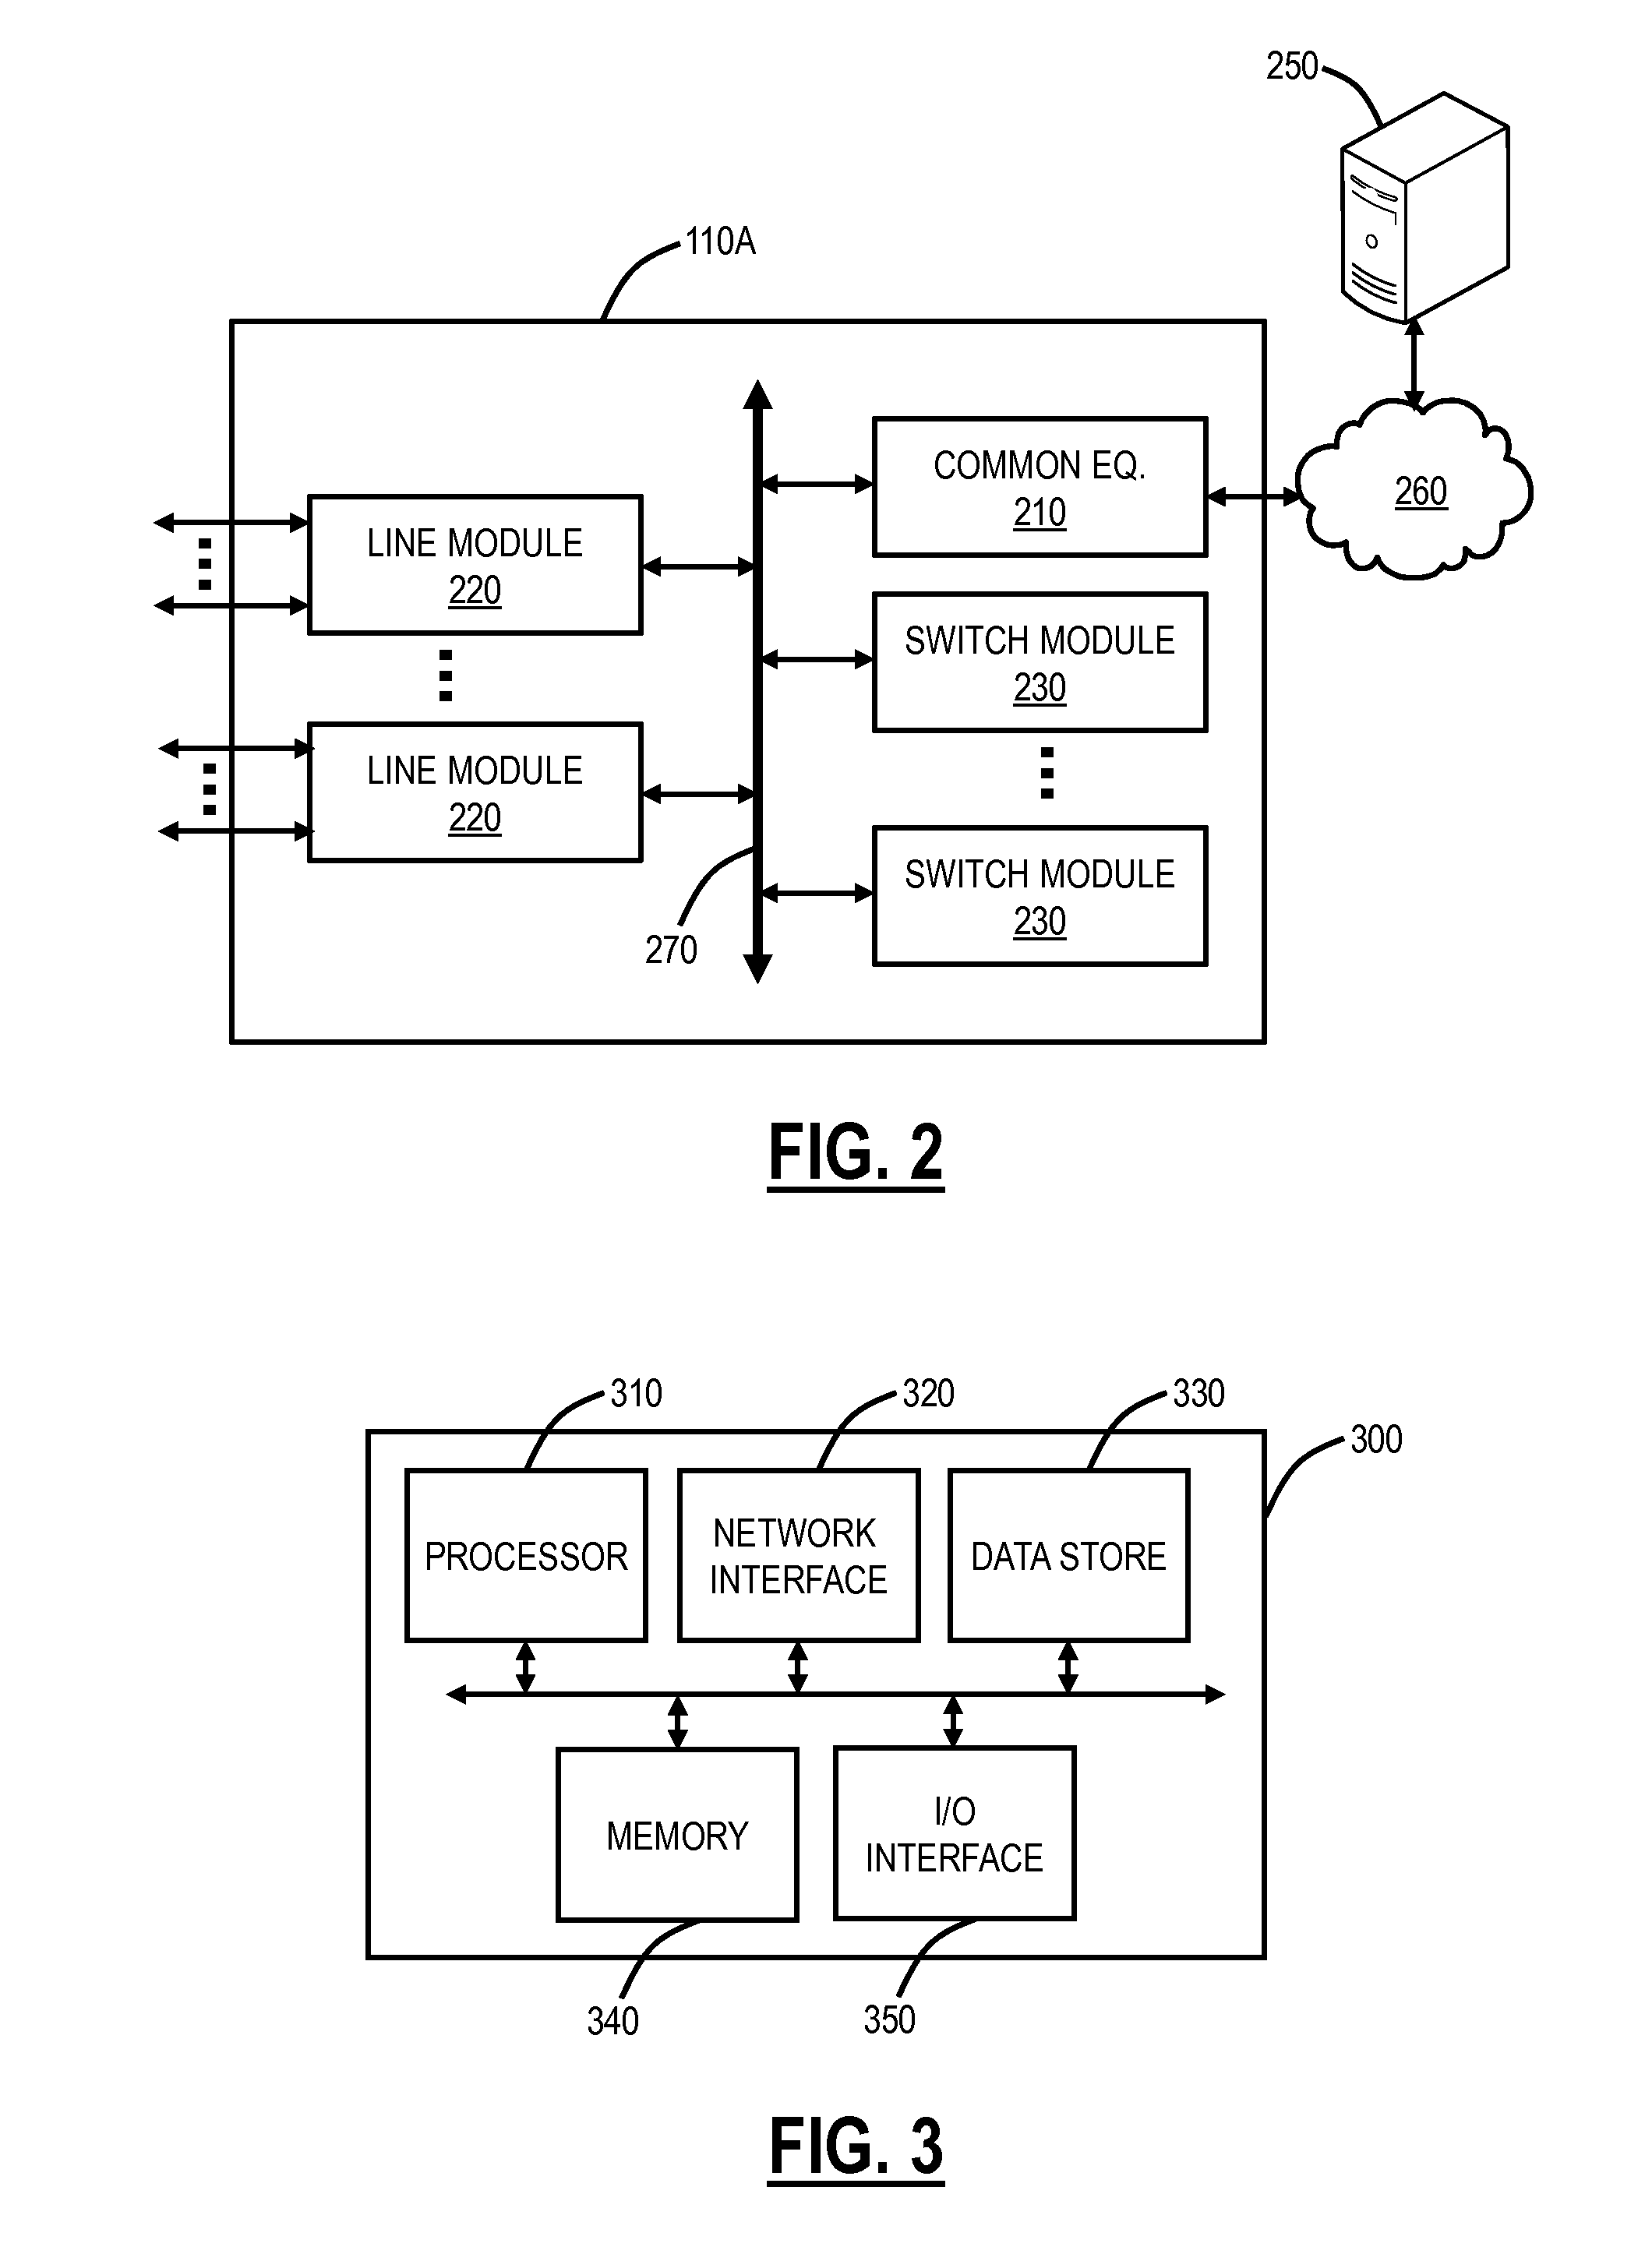 Opportunity based path computation systems and methods in constraint-based routing